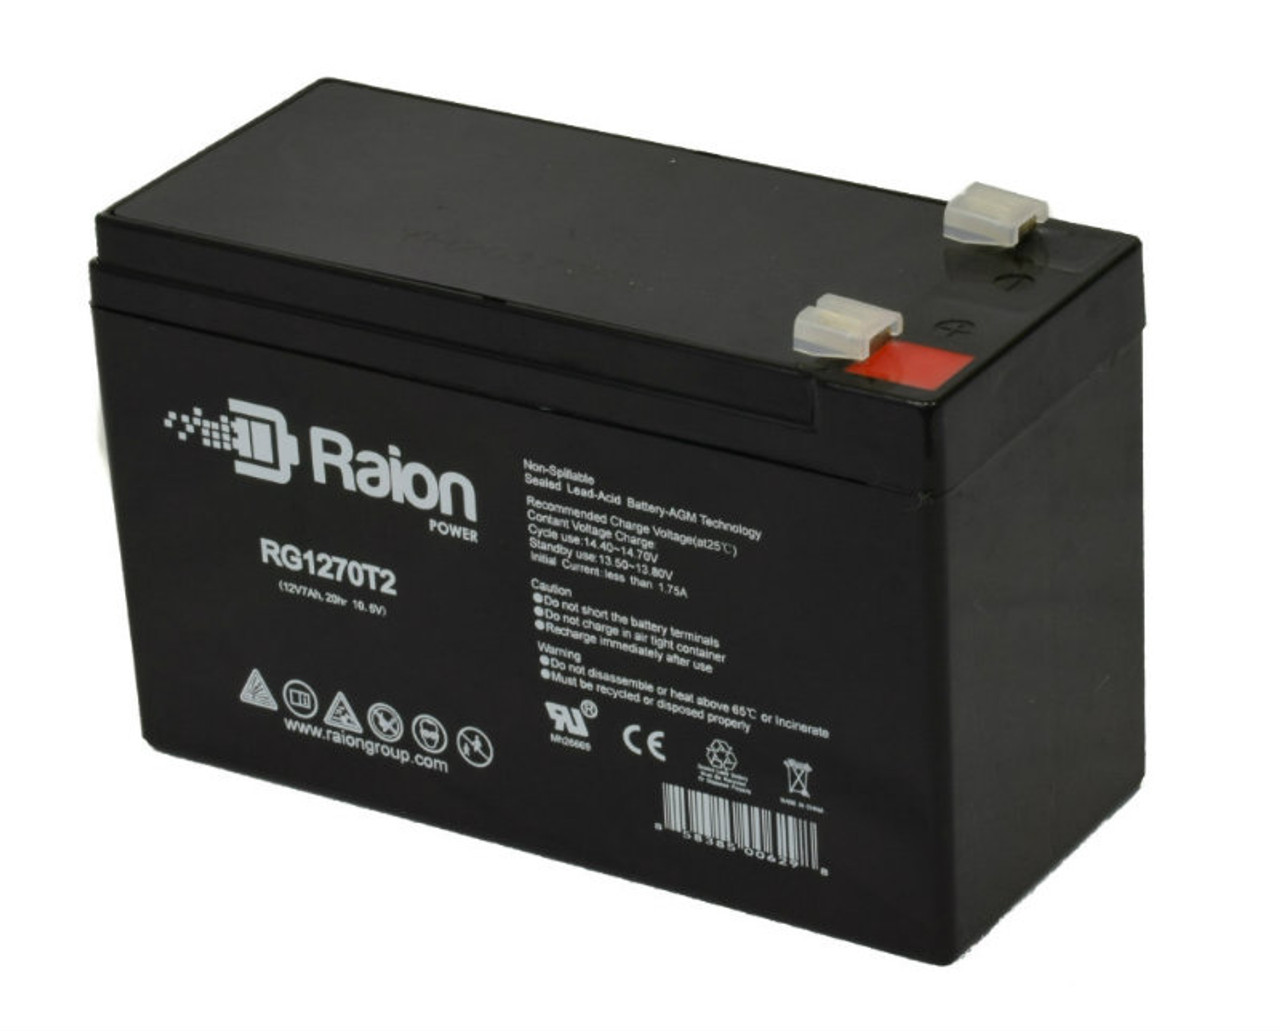 Raion Power Replacement 12V 7Ah RG1270T1 Fire Alarm Battery for Altronix SMP3PMP16CB